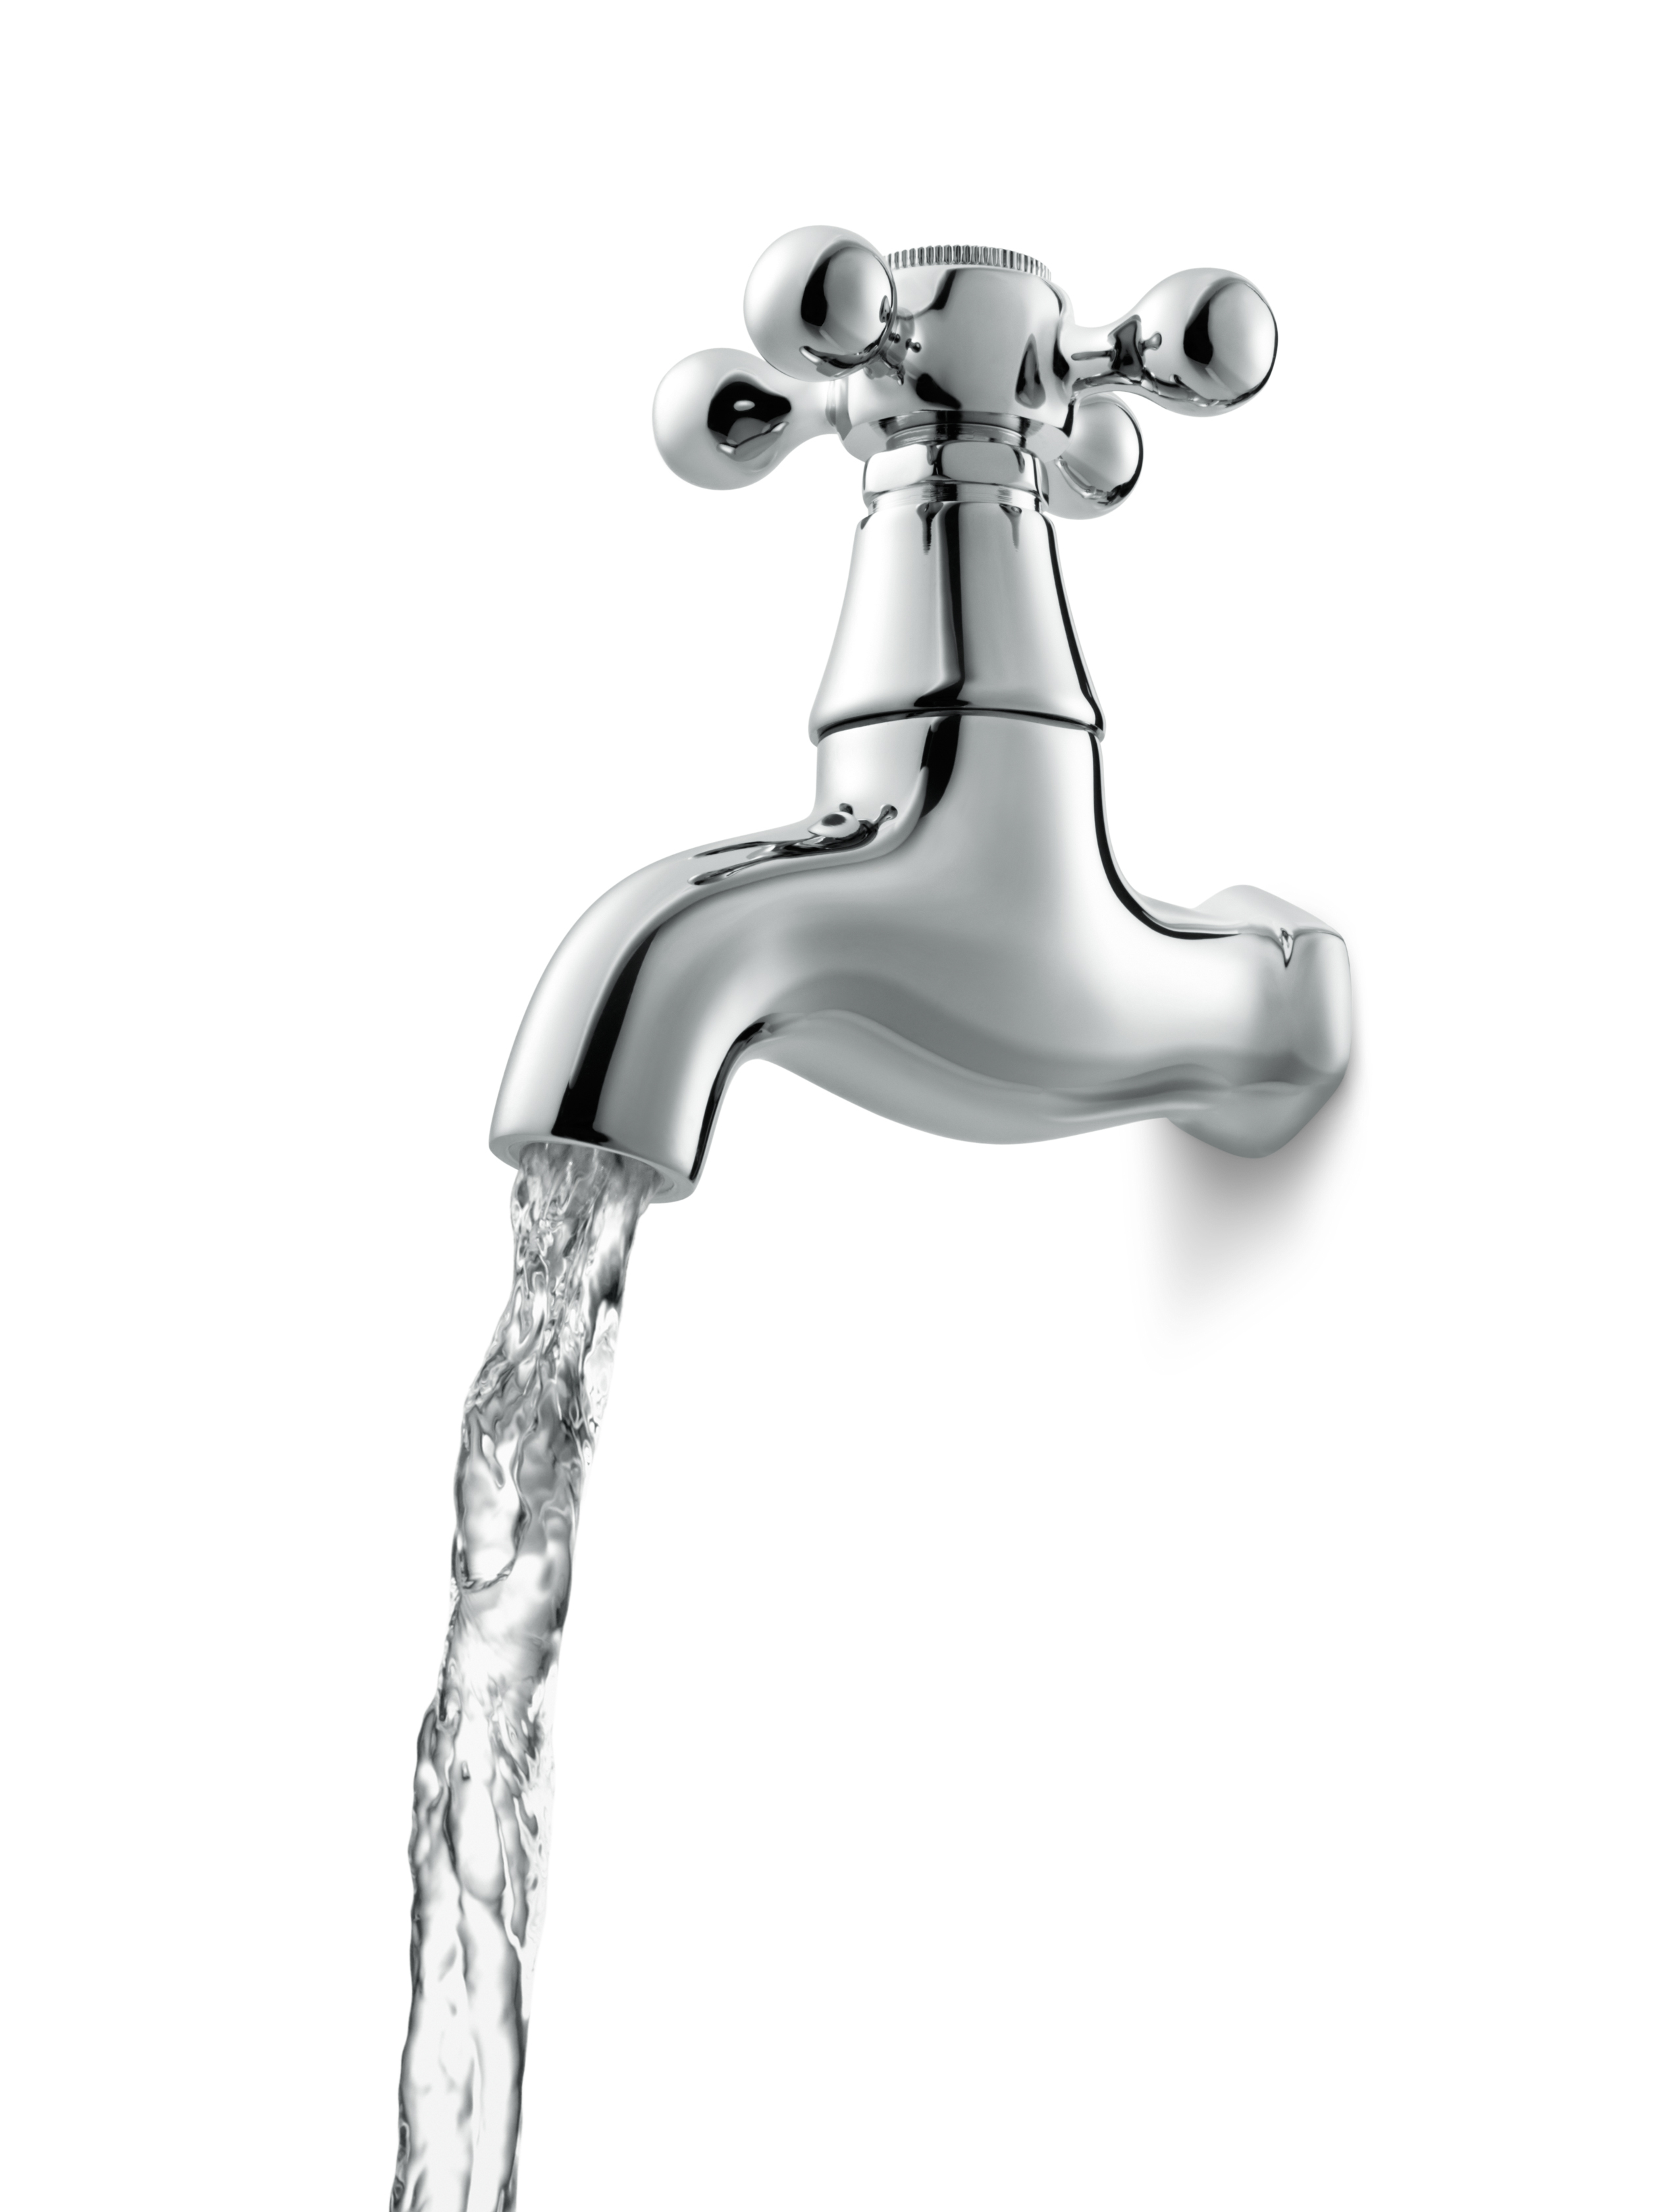 water faucet, Faucet, Cups, R